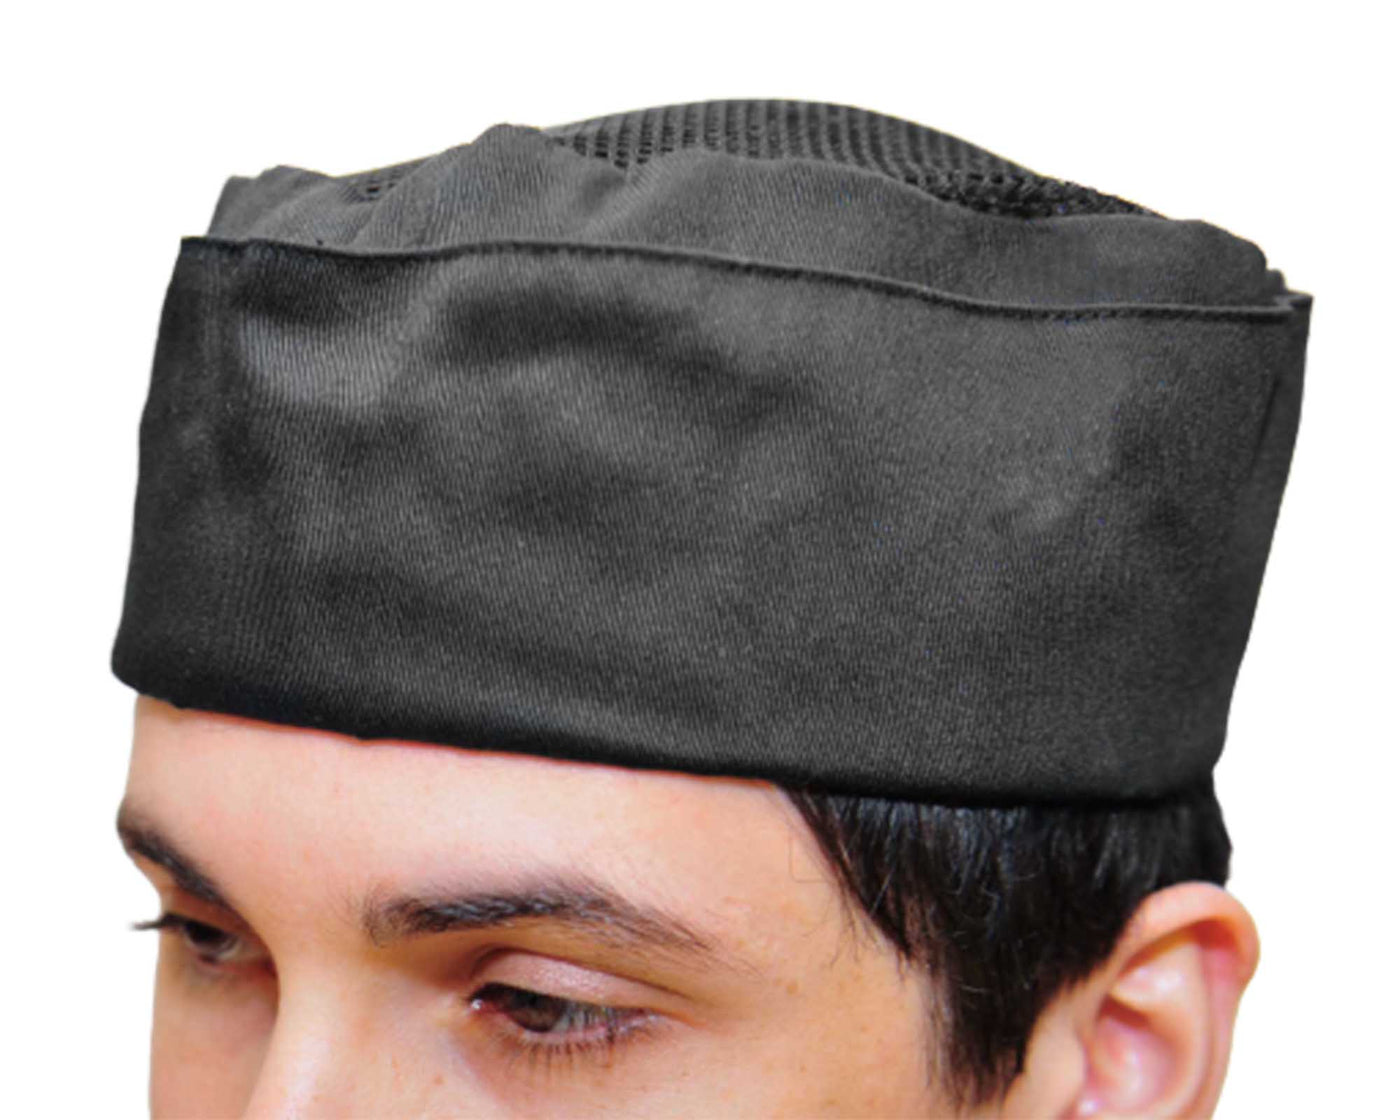 person wearing black chef hat with mesh top